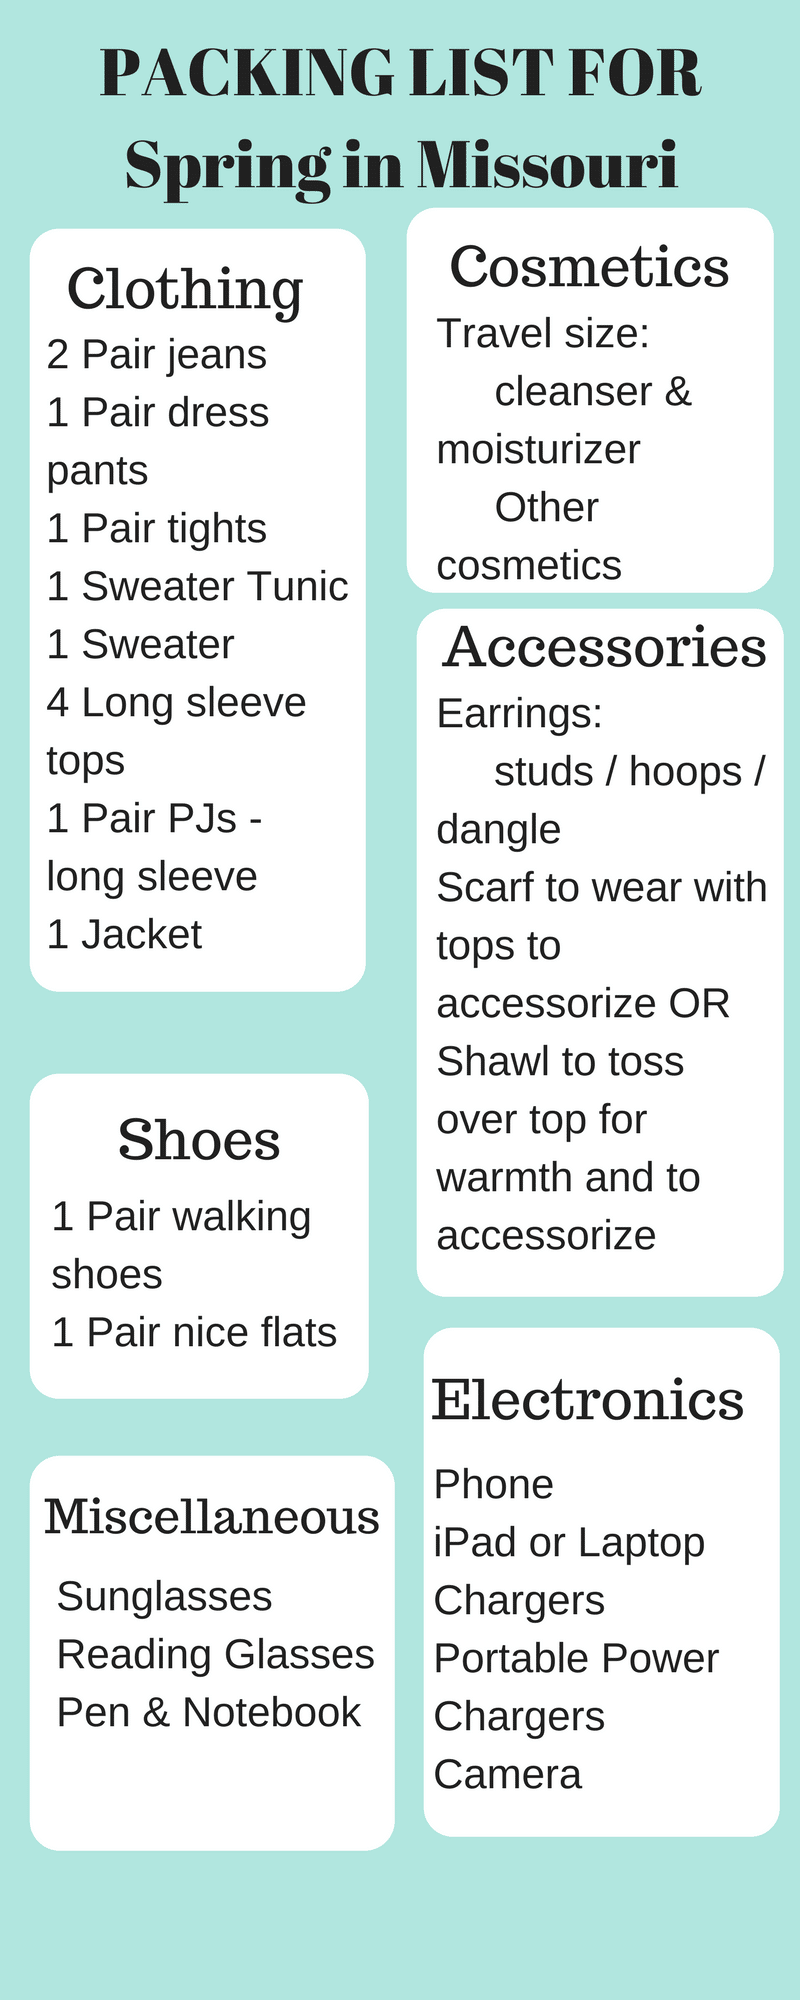 Packing List for Spring in Missouri